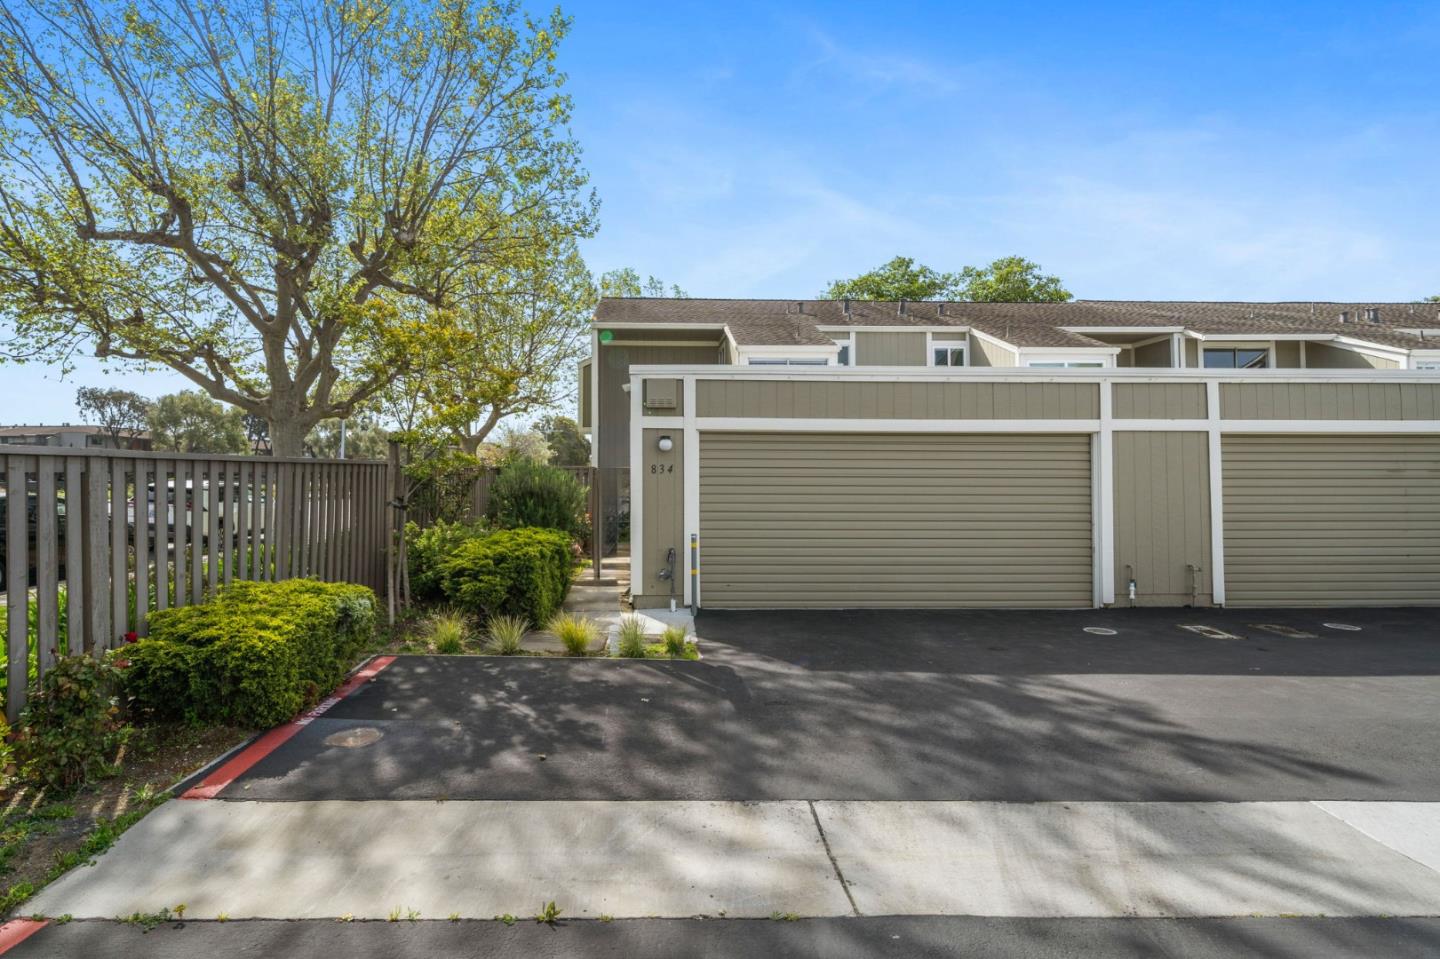 Photo of 834 Rigel Ln in Foster City, CA